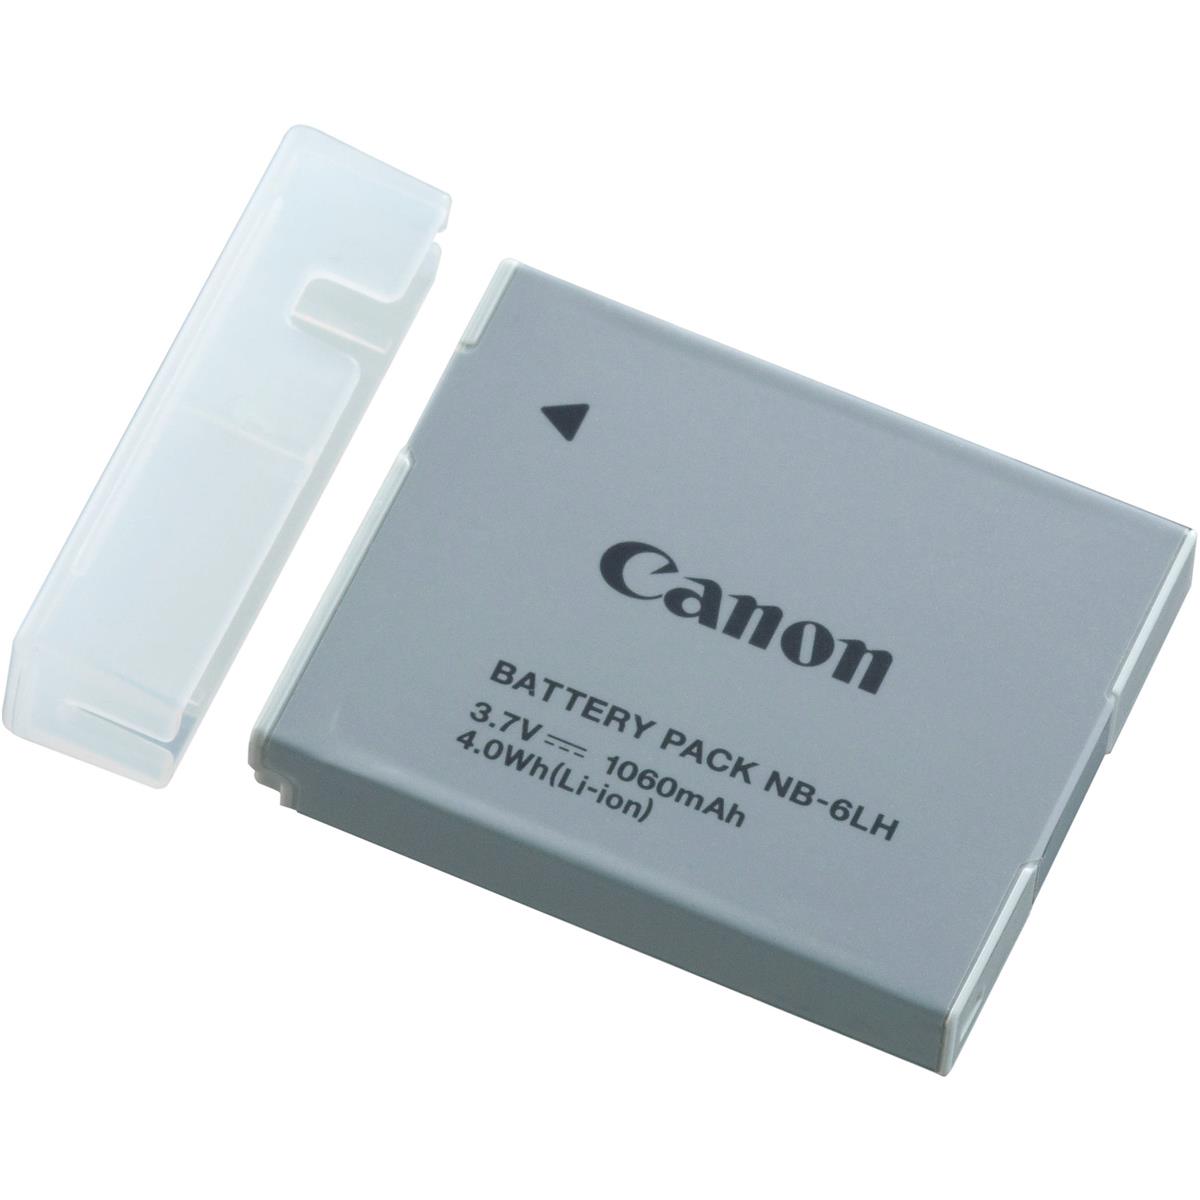 

Canon NB-6LH 3.7V 1060mAh Rechargeable Li-Ion Battery for Select Canon Cameras